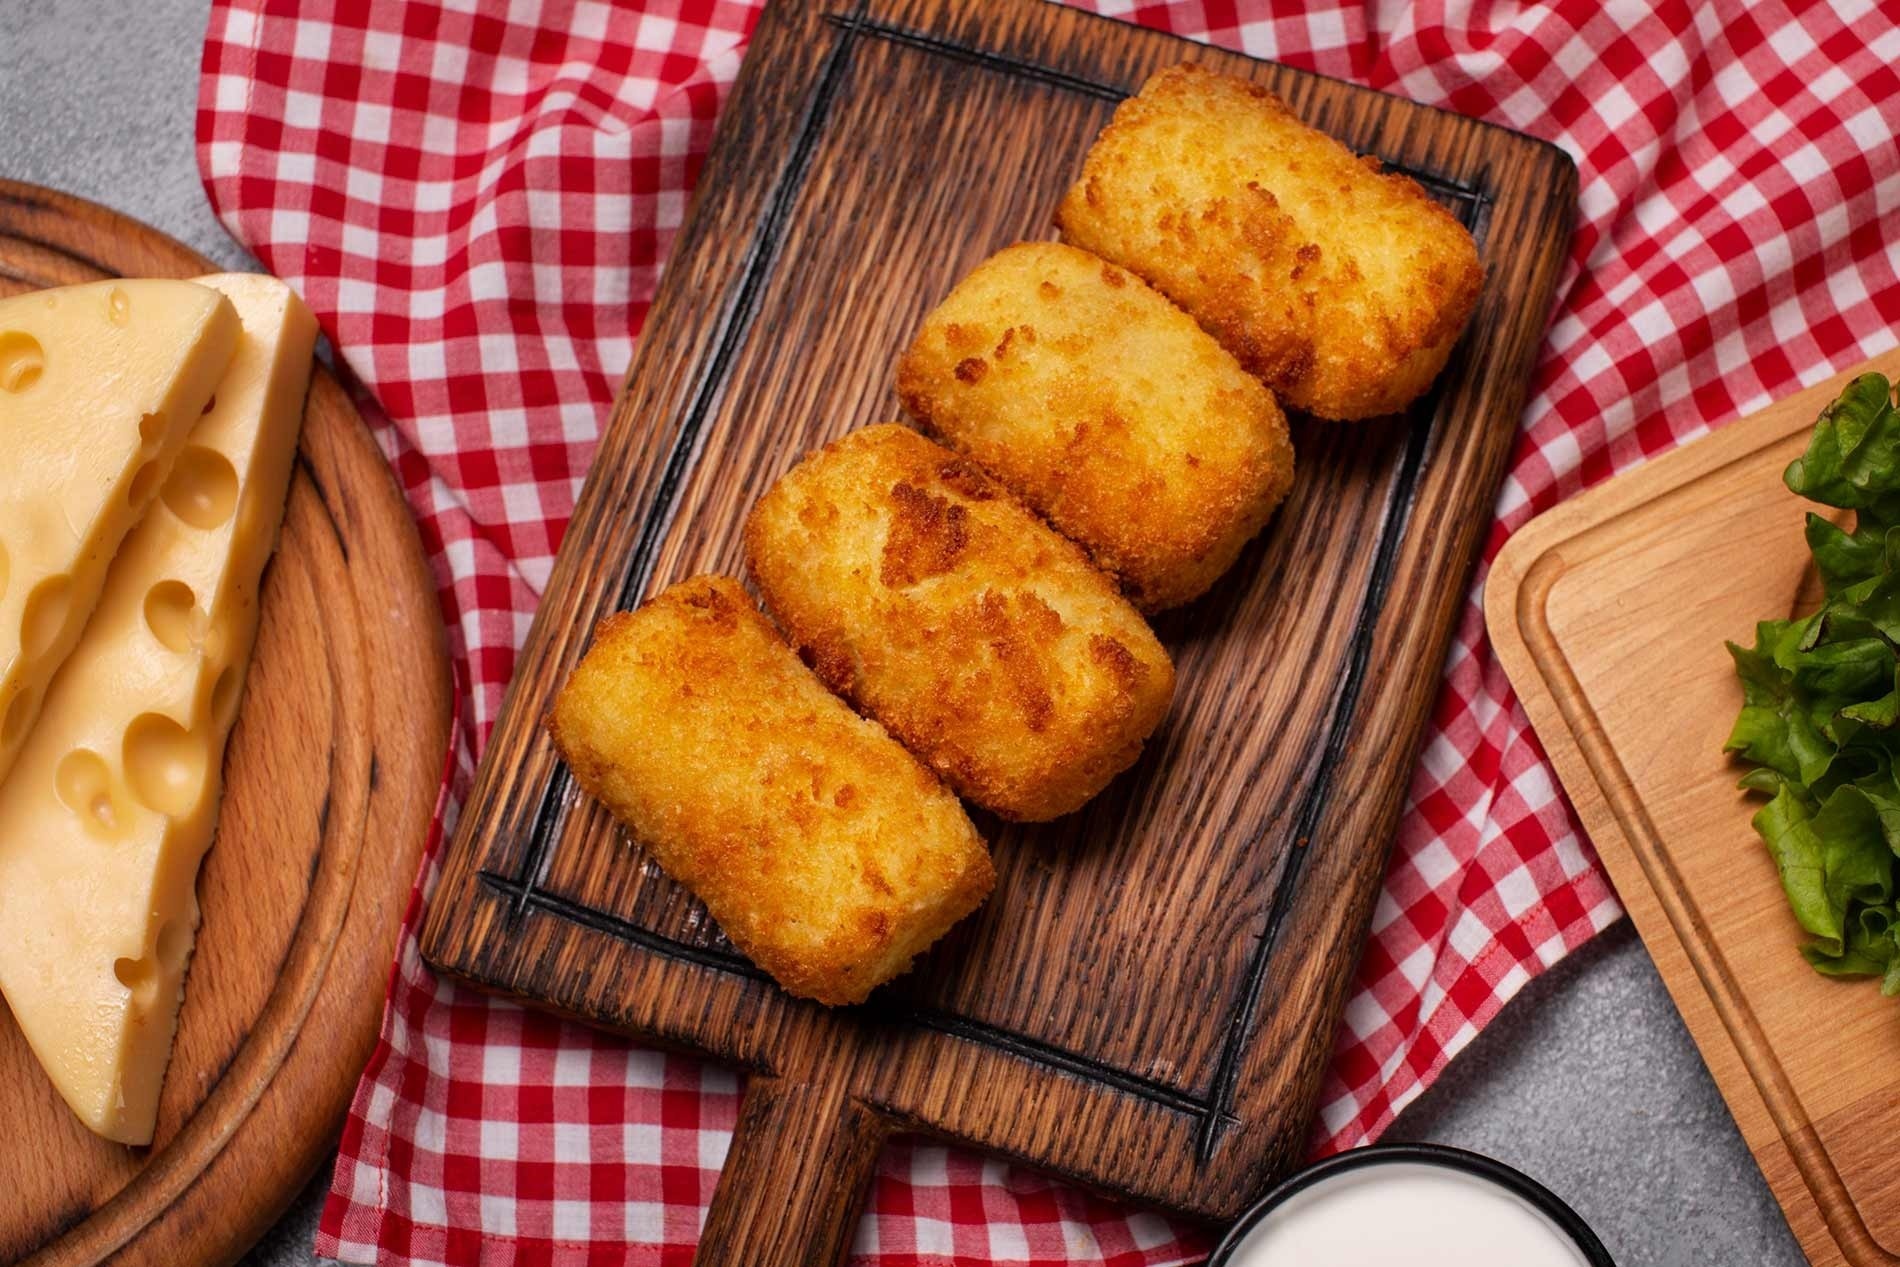 fried cheese sticks on a wooden cutting board